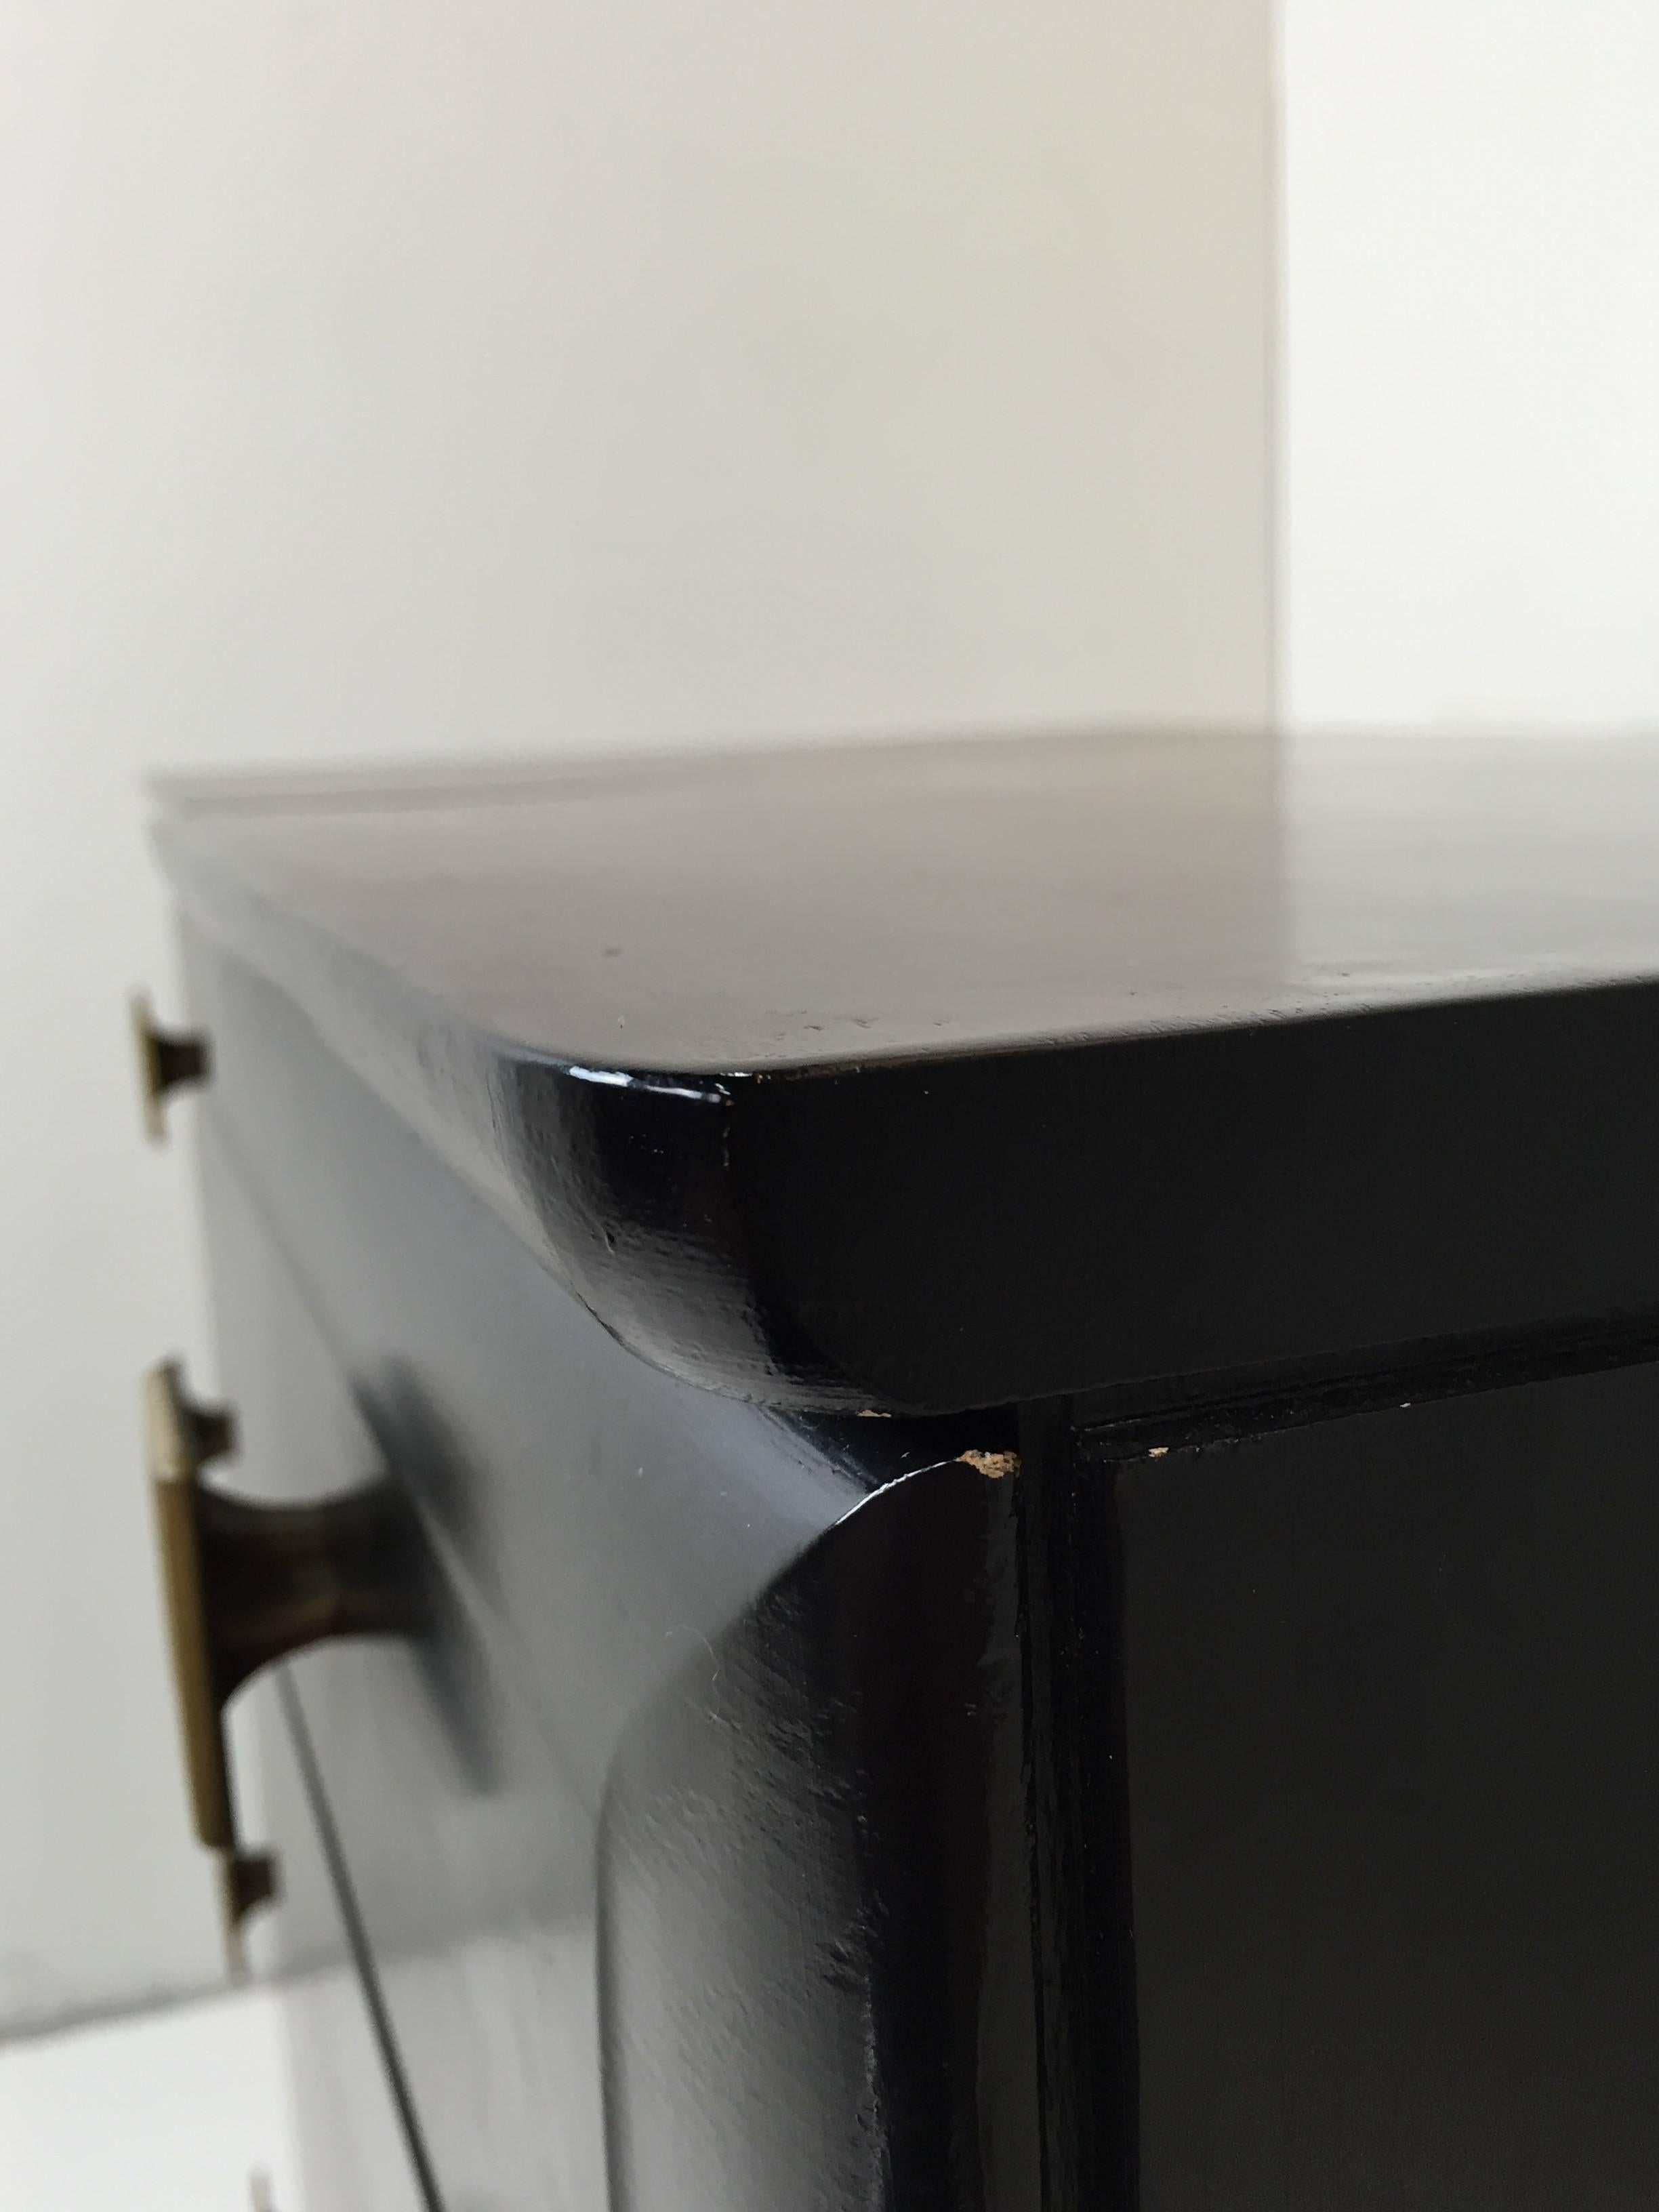 Current finish is ebonized, but our in house restoration team can provide a new lacquer finish or recreate the ebonized finish for you.